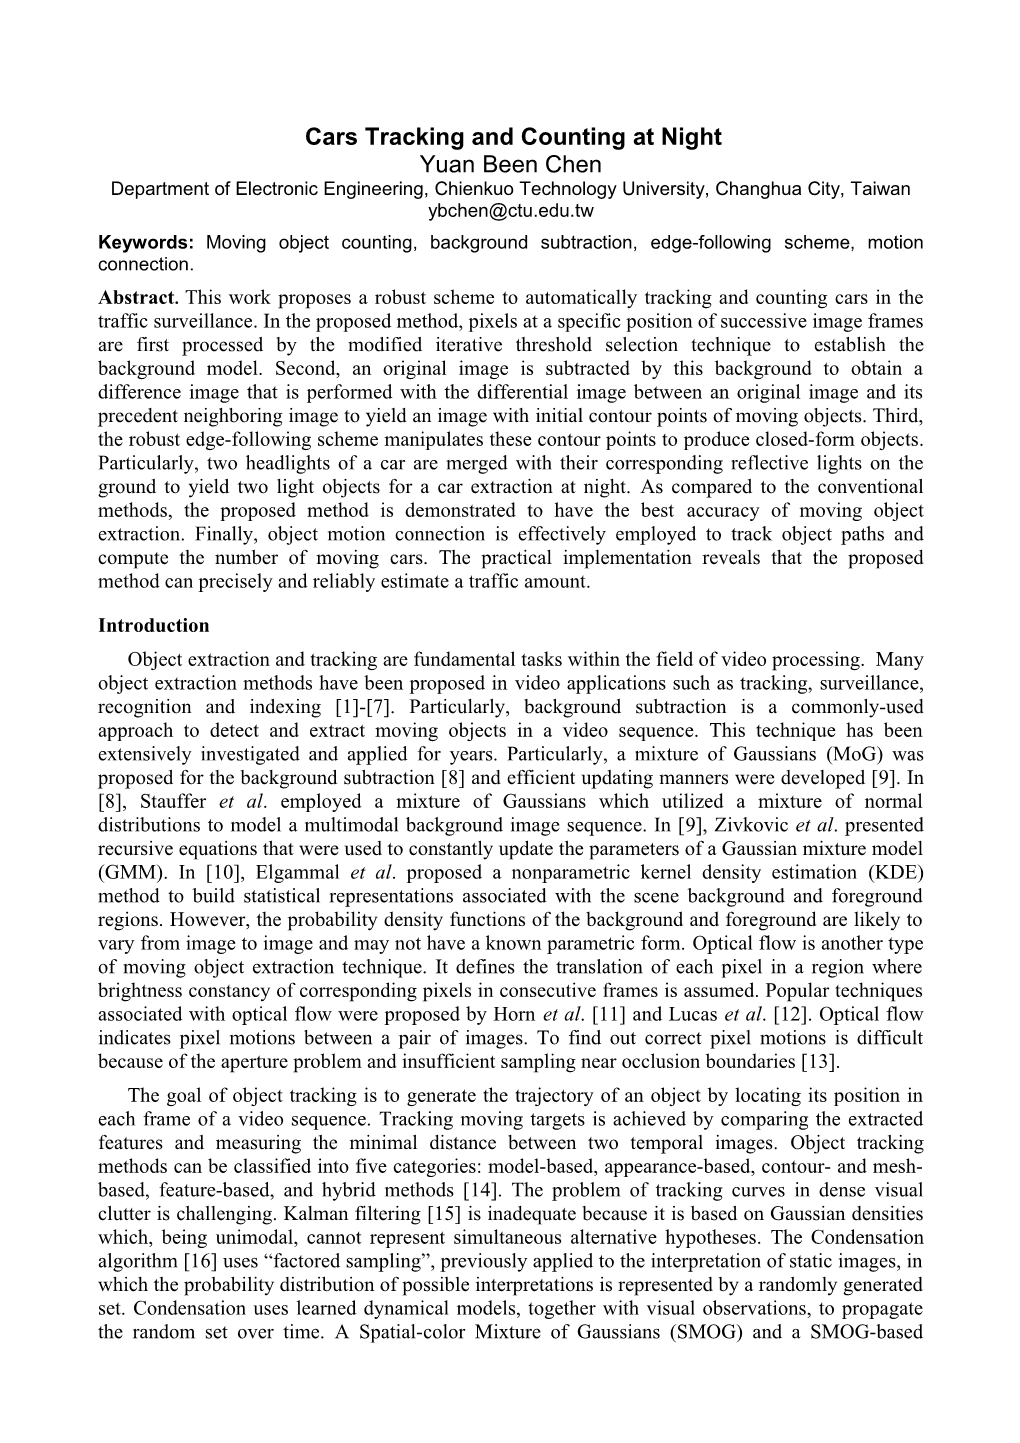 Preparation of Papers in a Two-Column Format for the 21St Annual Conference of the IEEE